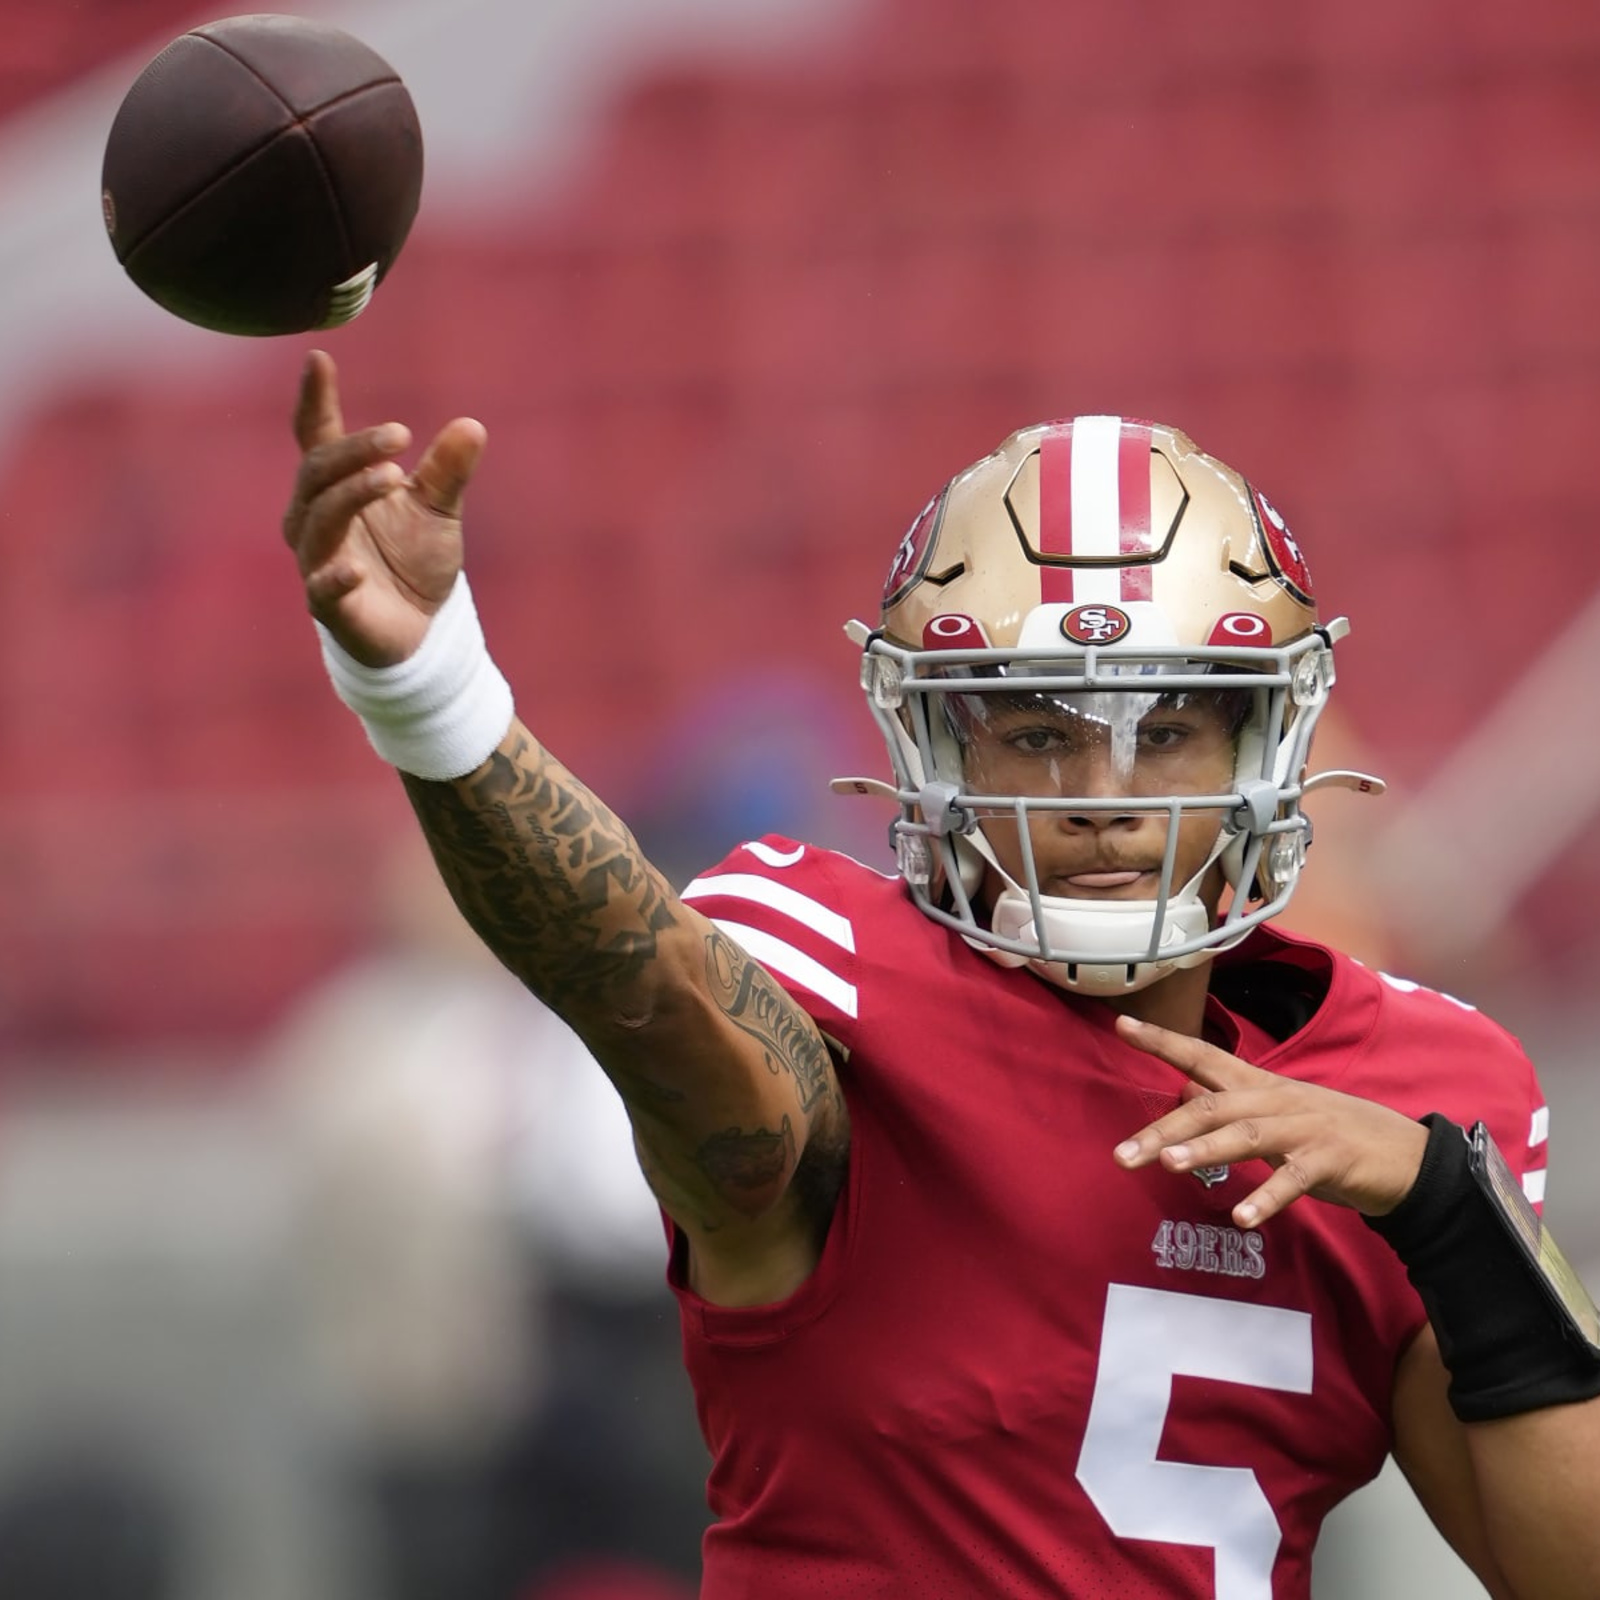 2021 NFL Draft: What should the 49ers do with the No. 3 overall pick?